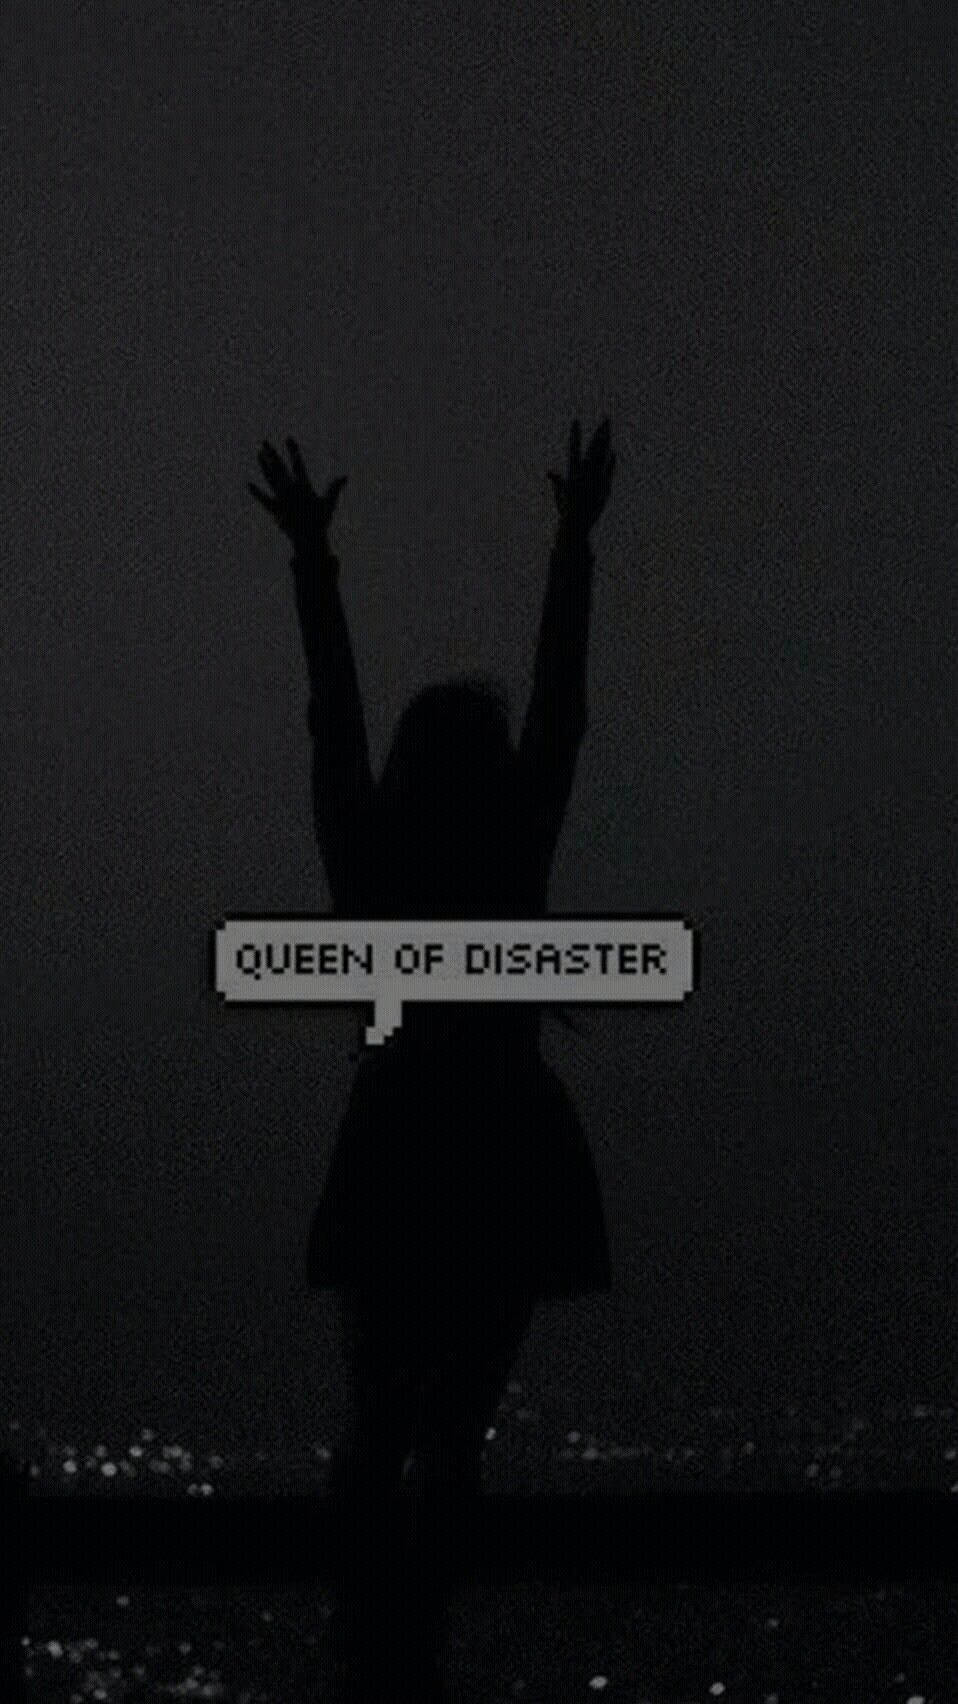 Queen Of Disaster Over Black Background Indie Phone Wallpaper